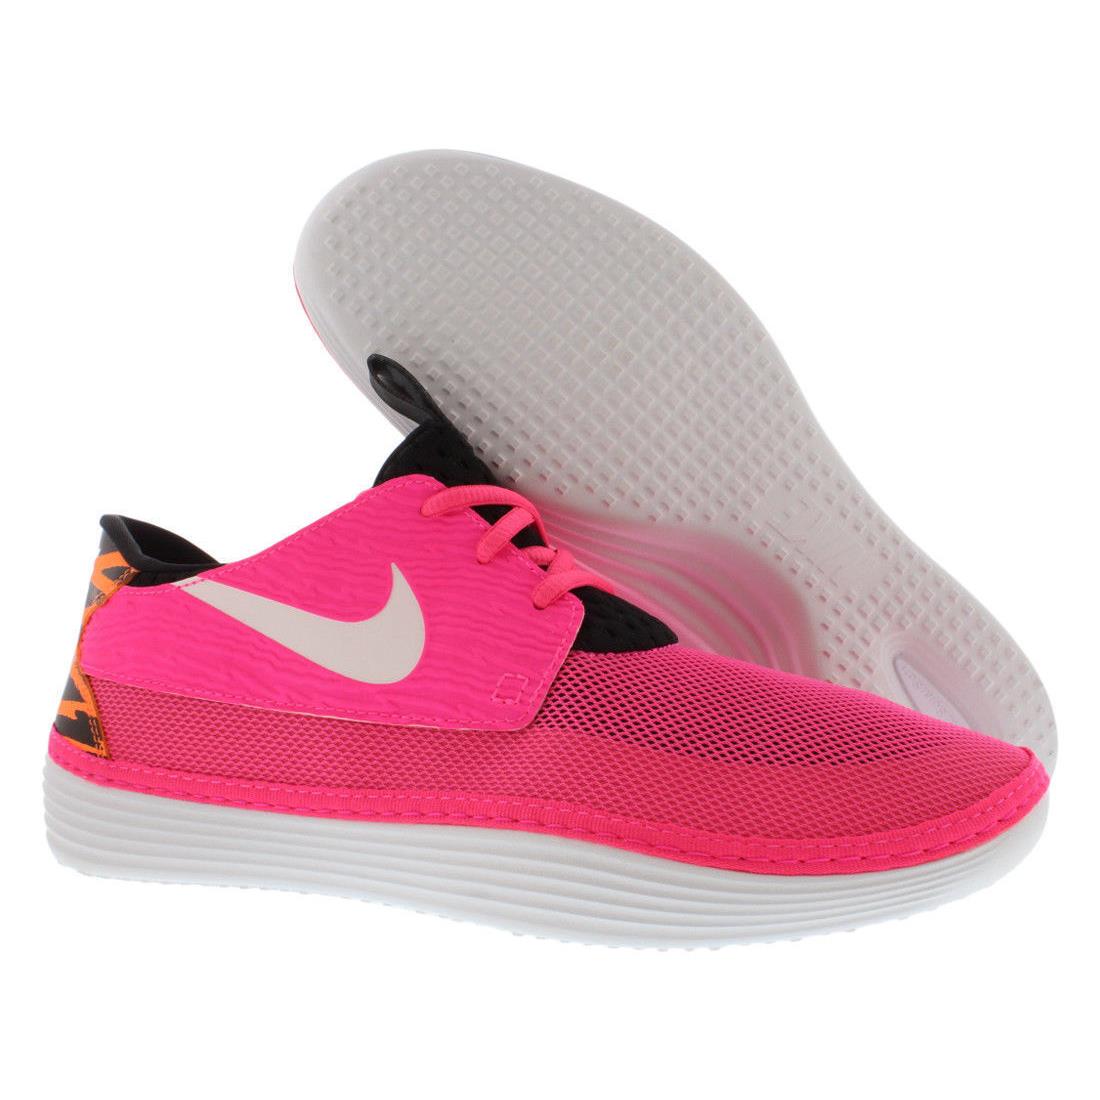 Nike Solarsoft Moccasin Casual Mens Shoes Sneakers 555301 618 - Pink